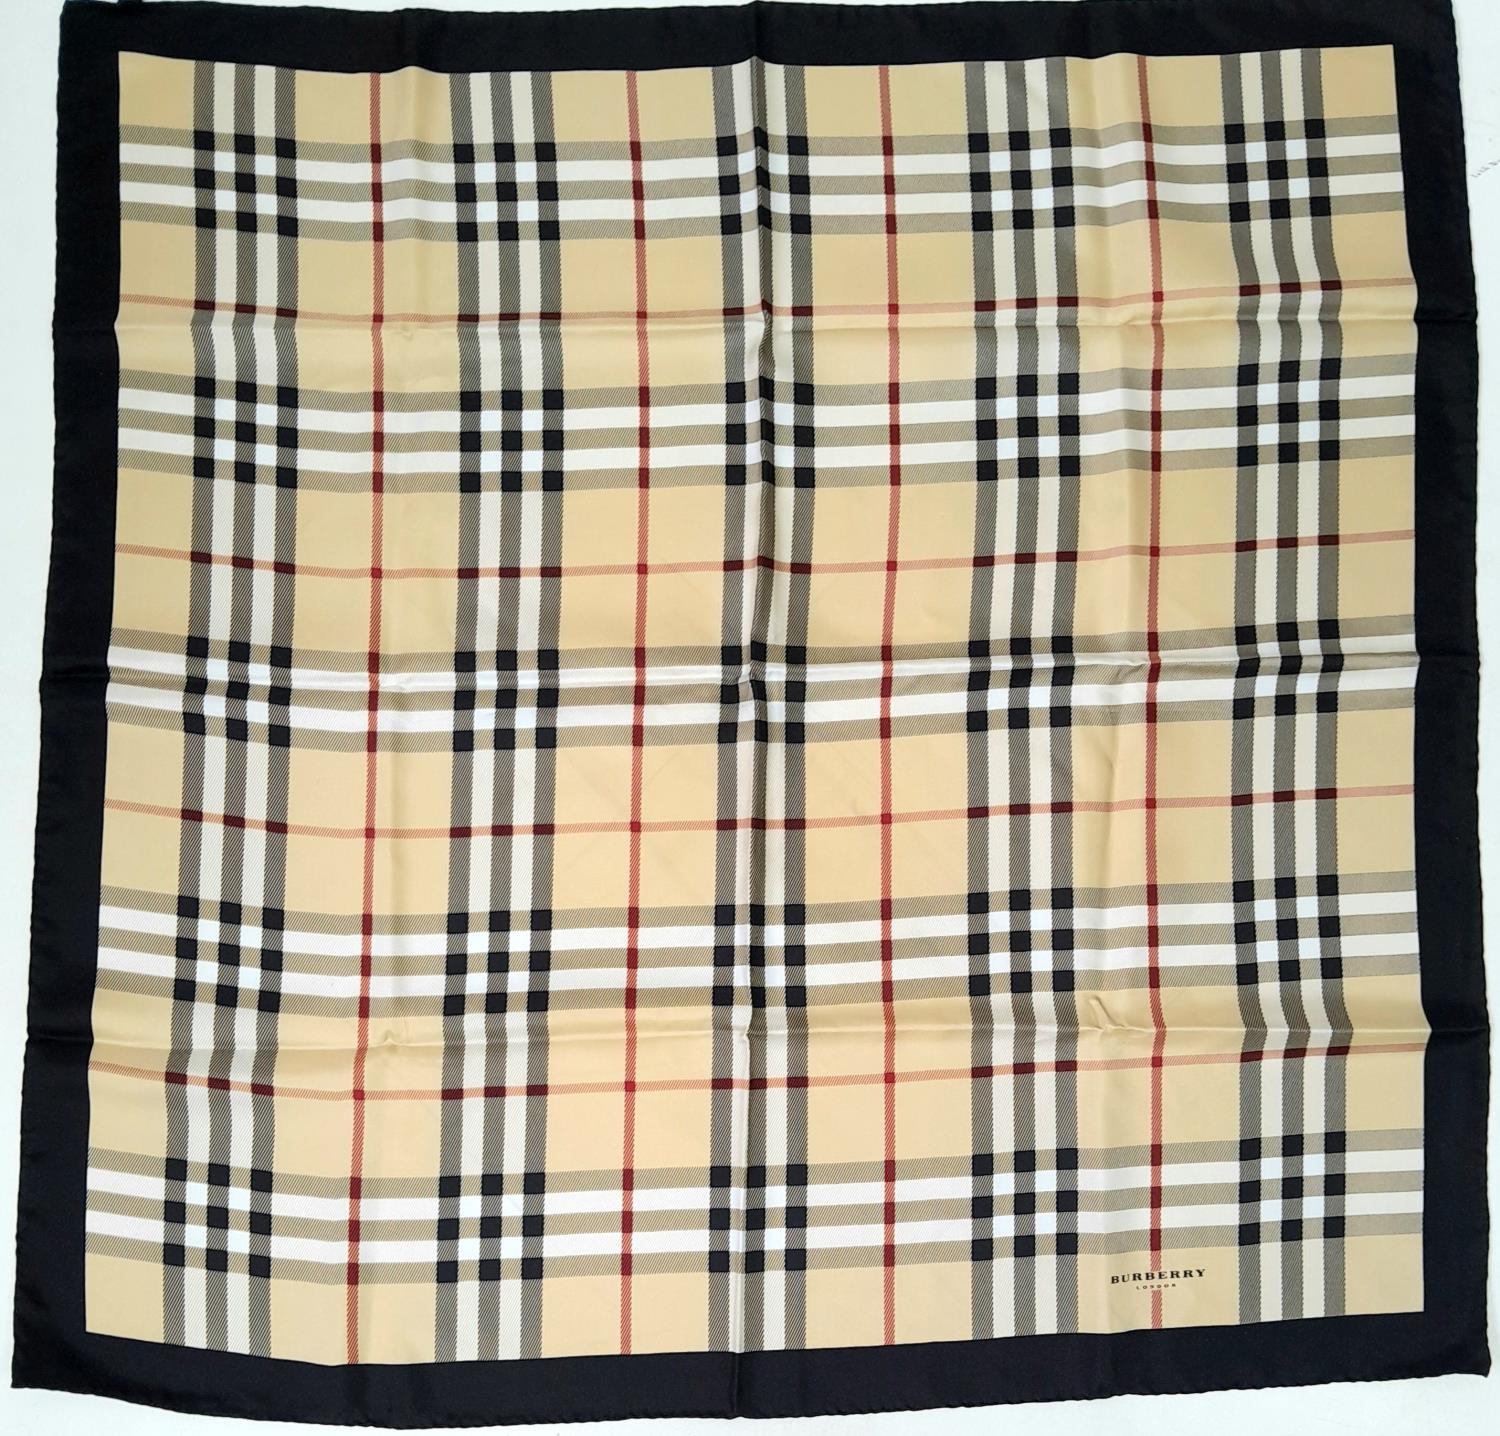 A Burberry Nova Check Scarf. 100% silk, made in Italy. Approximately 90cm x 90cm. Please see